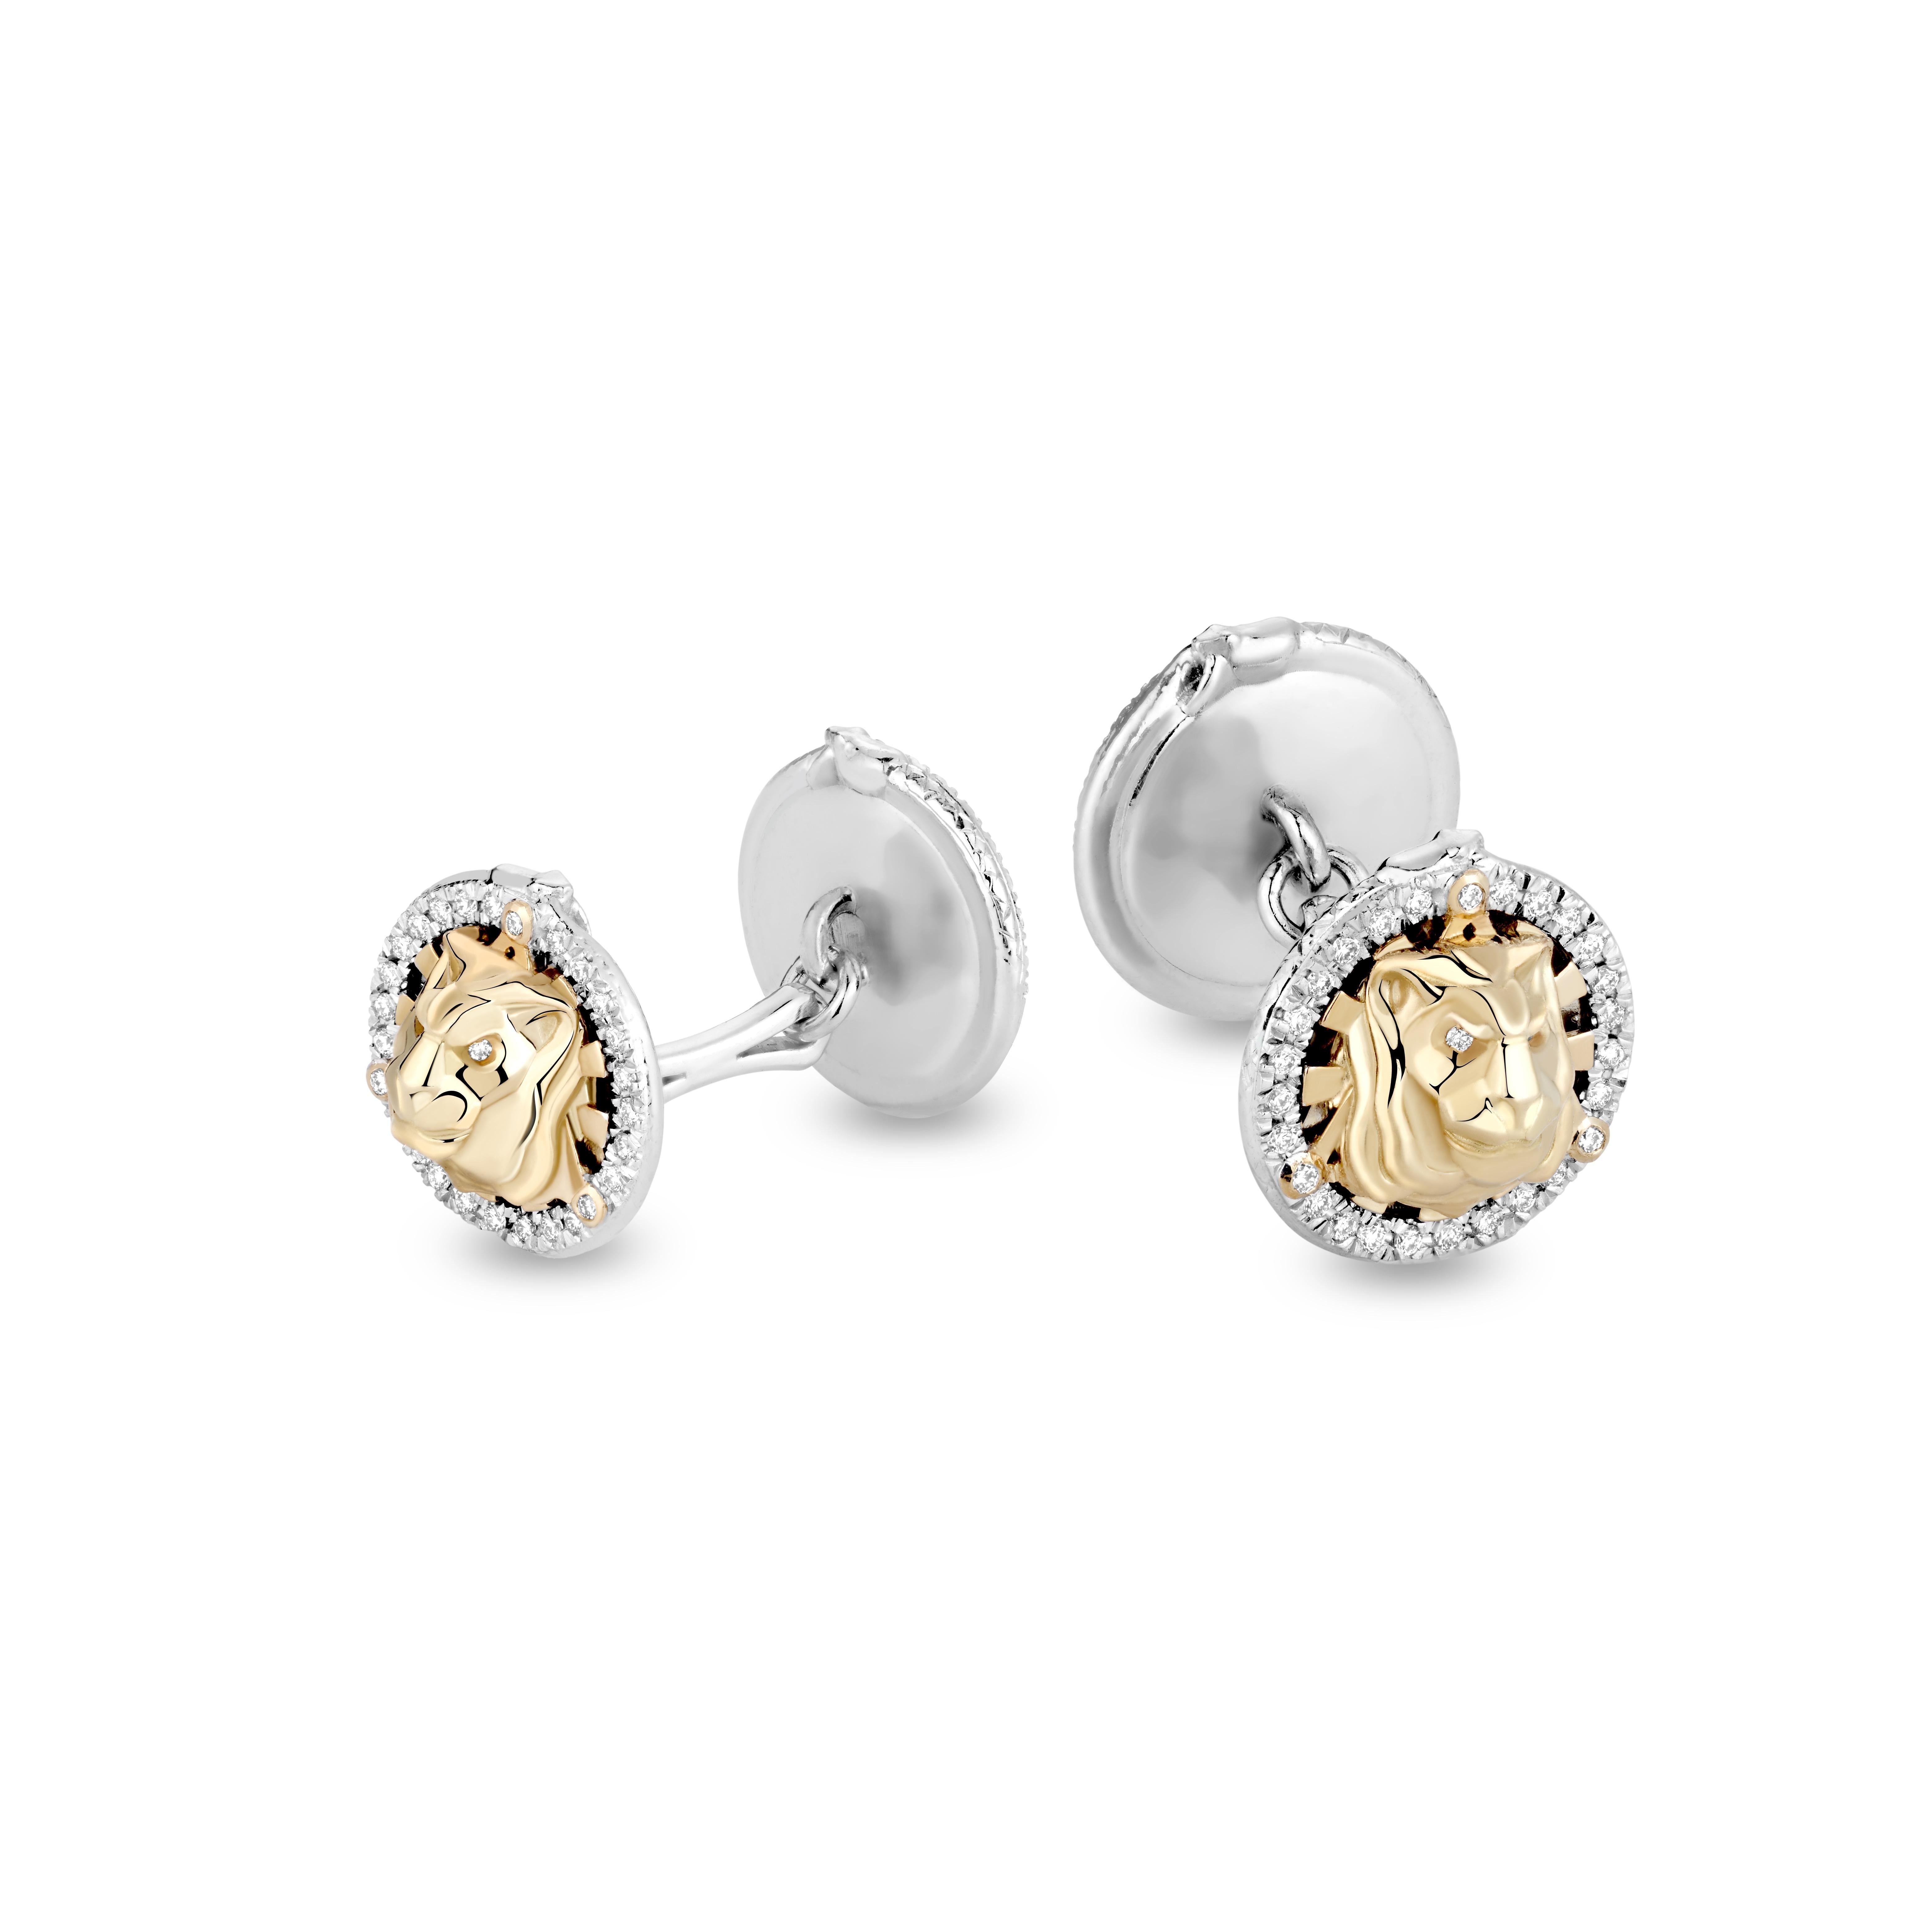 Lion cufflinks in 18K gold and diamonds are a must have accessory for a refined, luxurious man. They feature the face of a lion, surrounded by the rays of the shining sun, all placed within a triangle. Akin to the symbol of the all-seeing eye, the